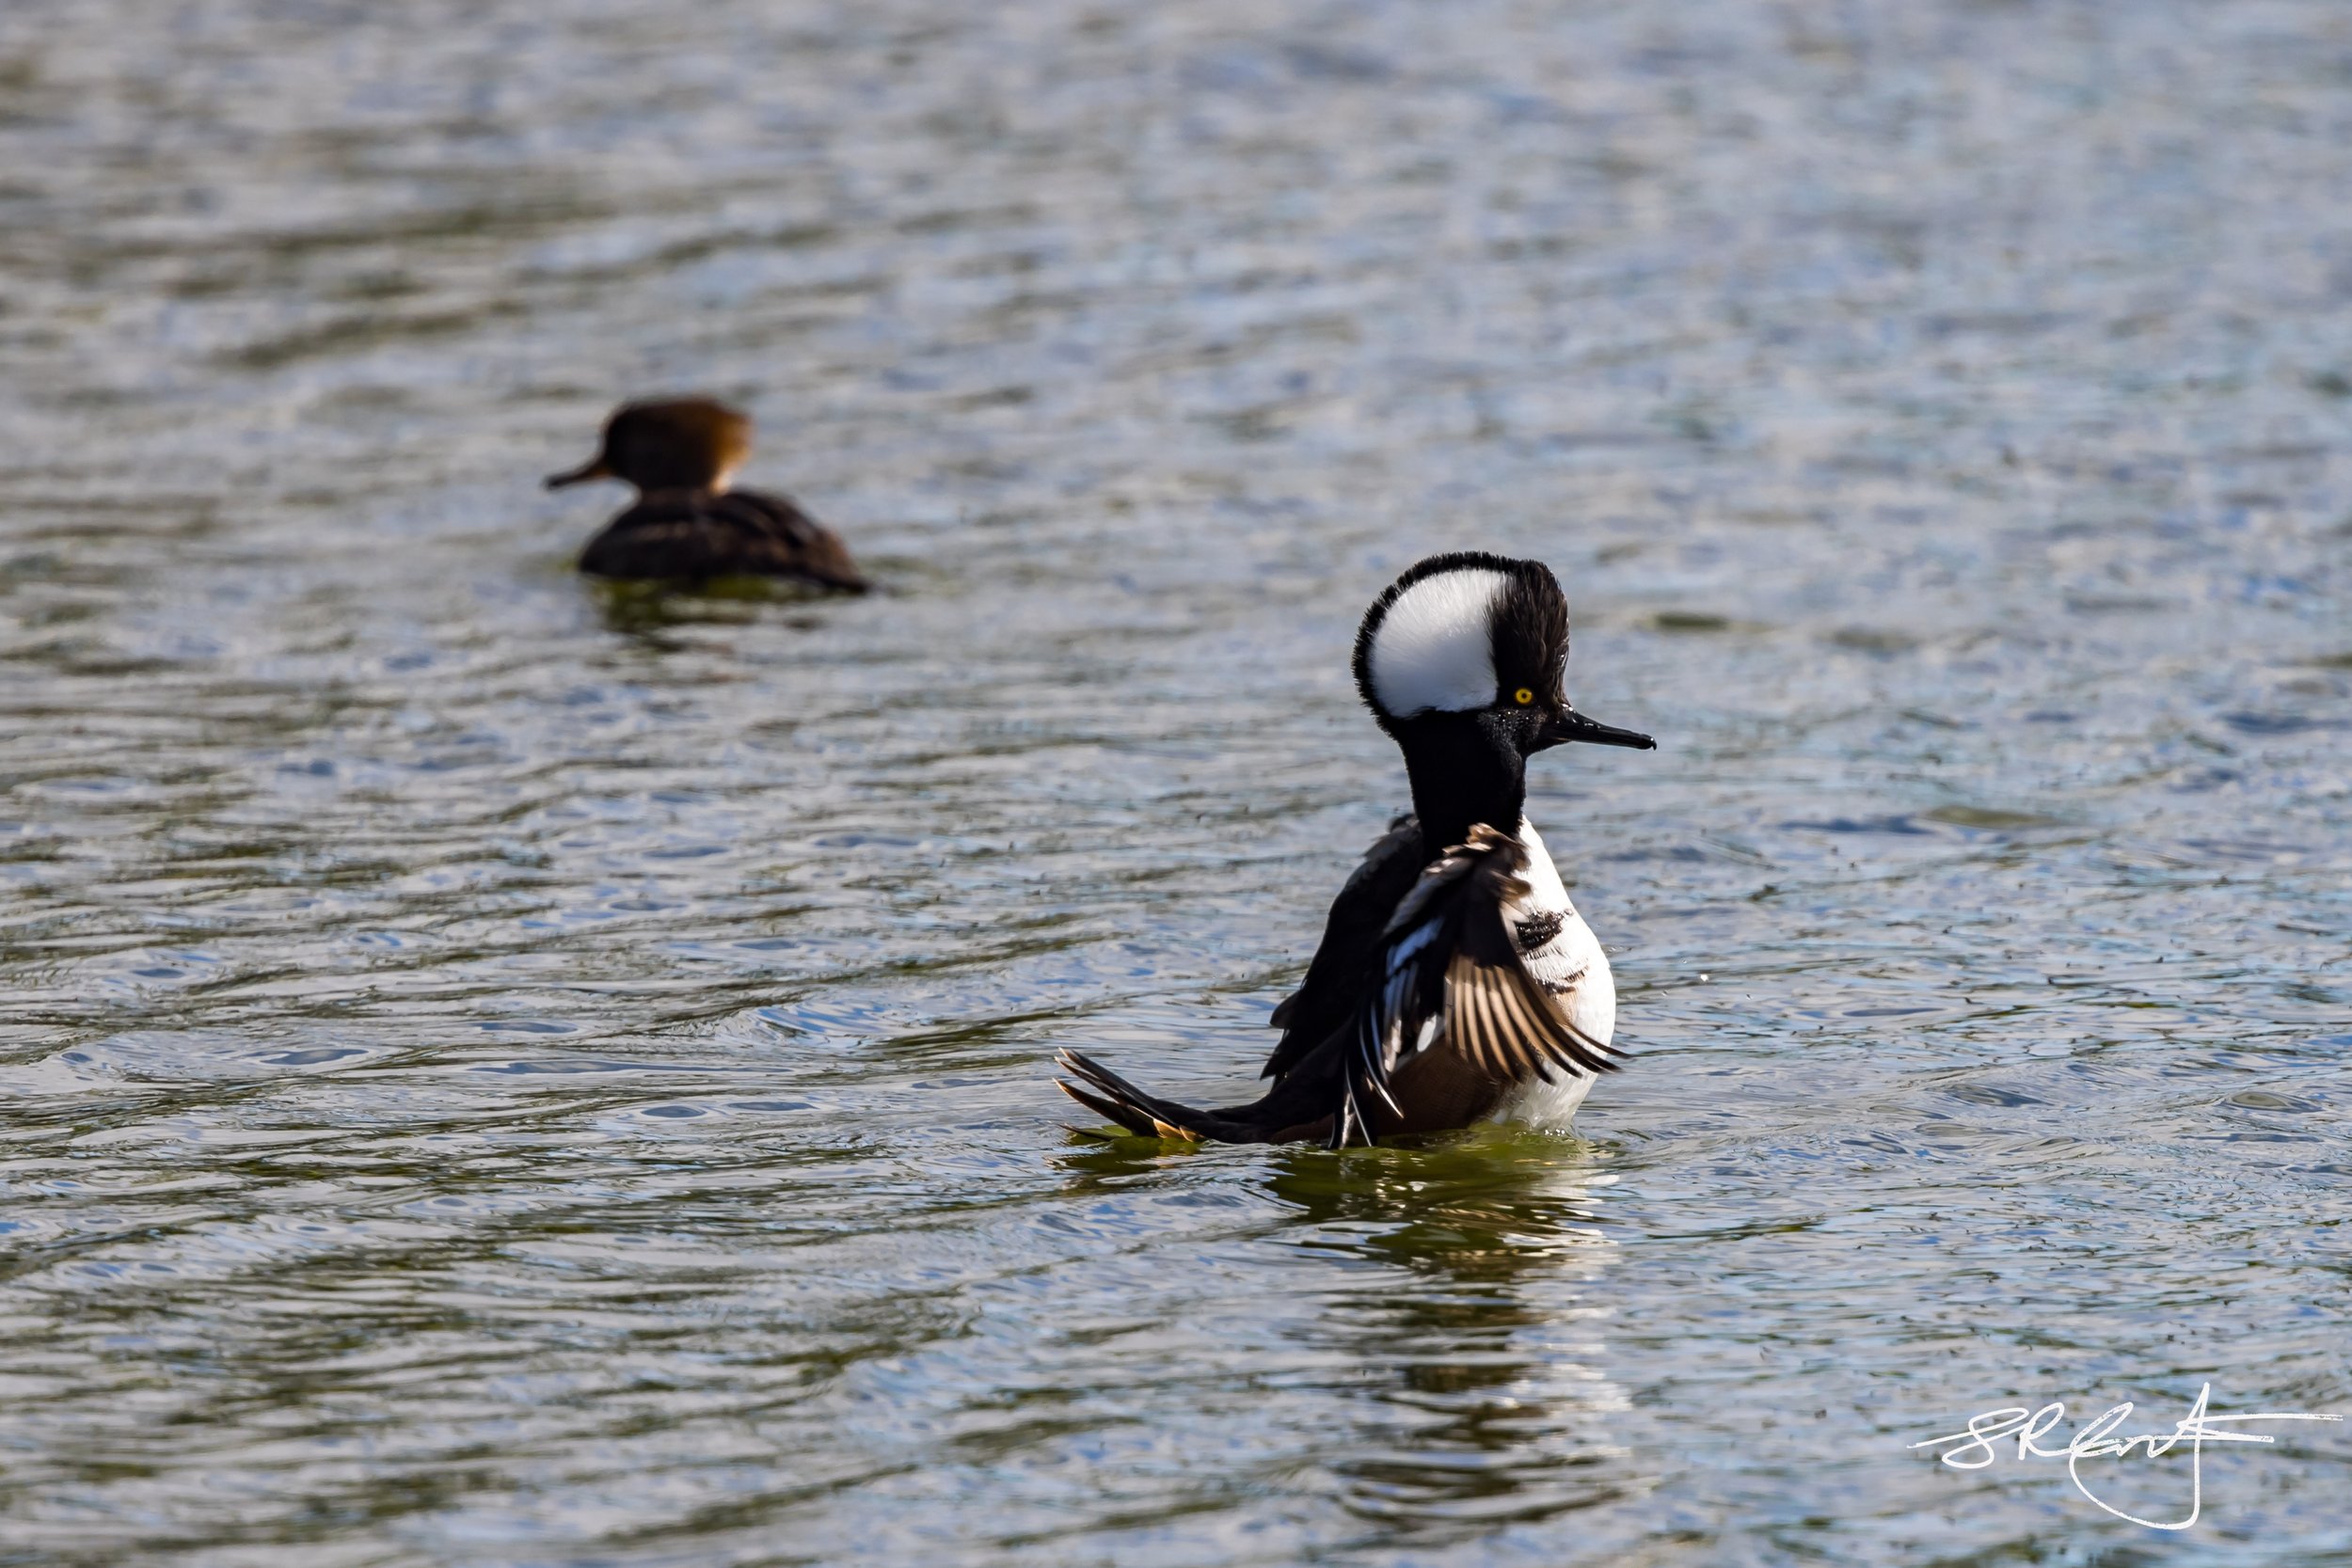 Hooded Merganser, trying to impress the ladies.